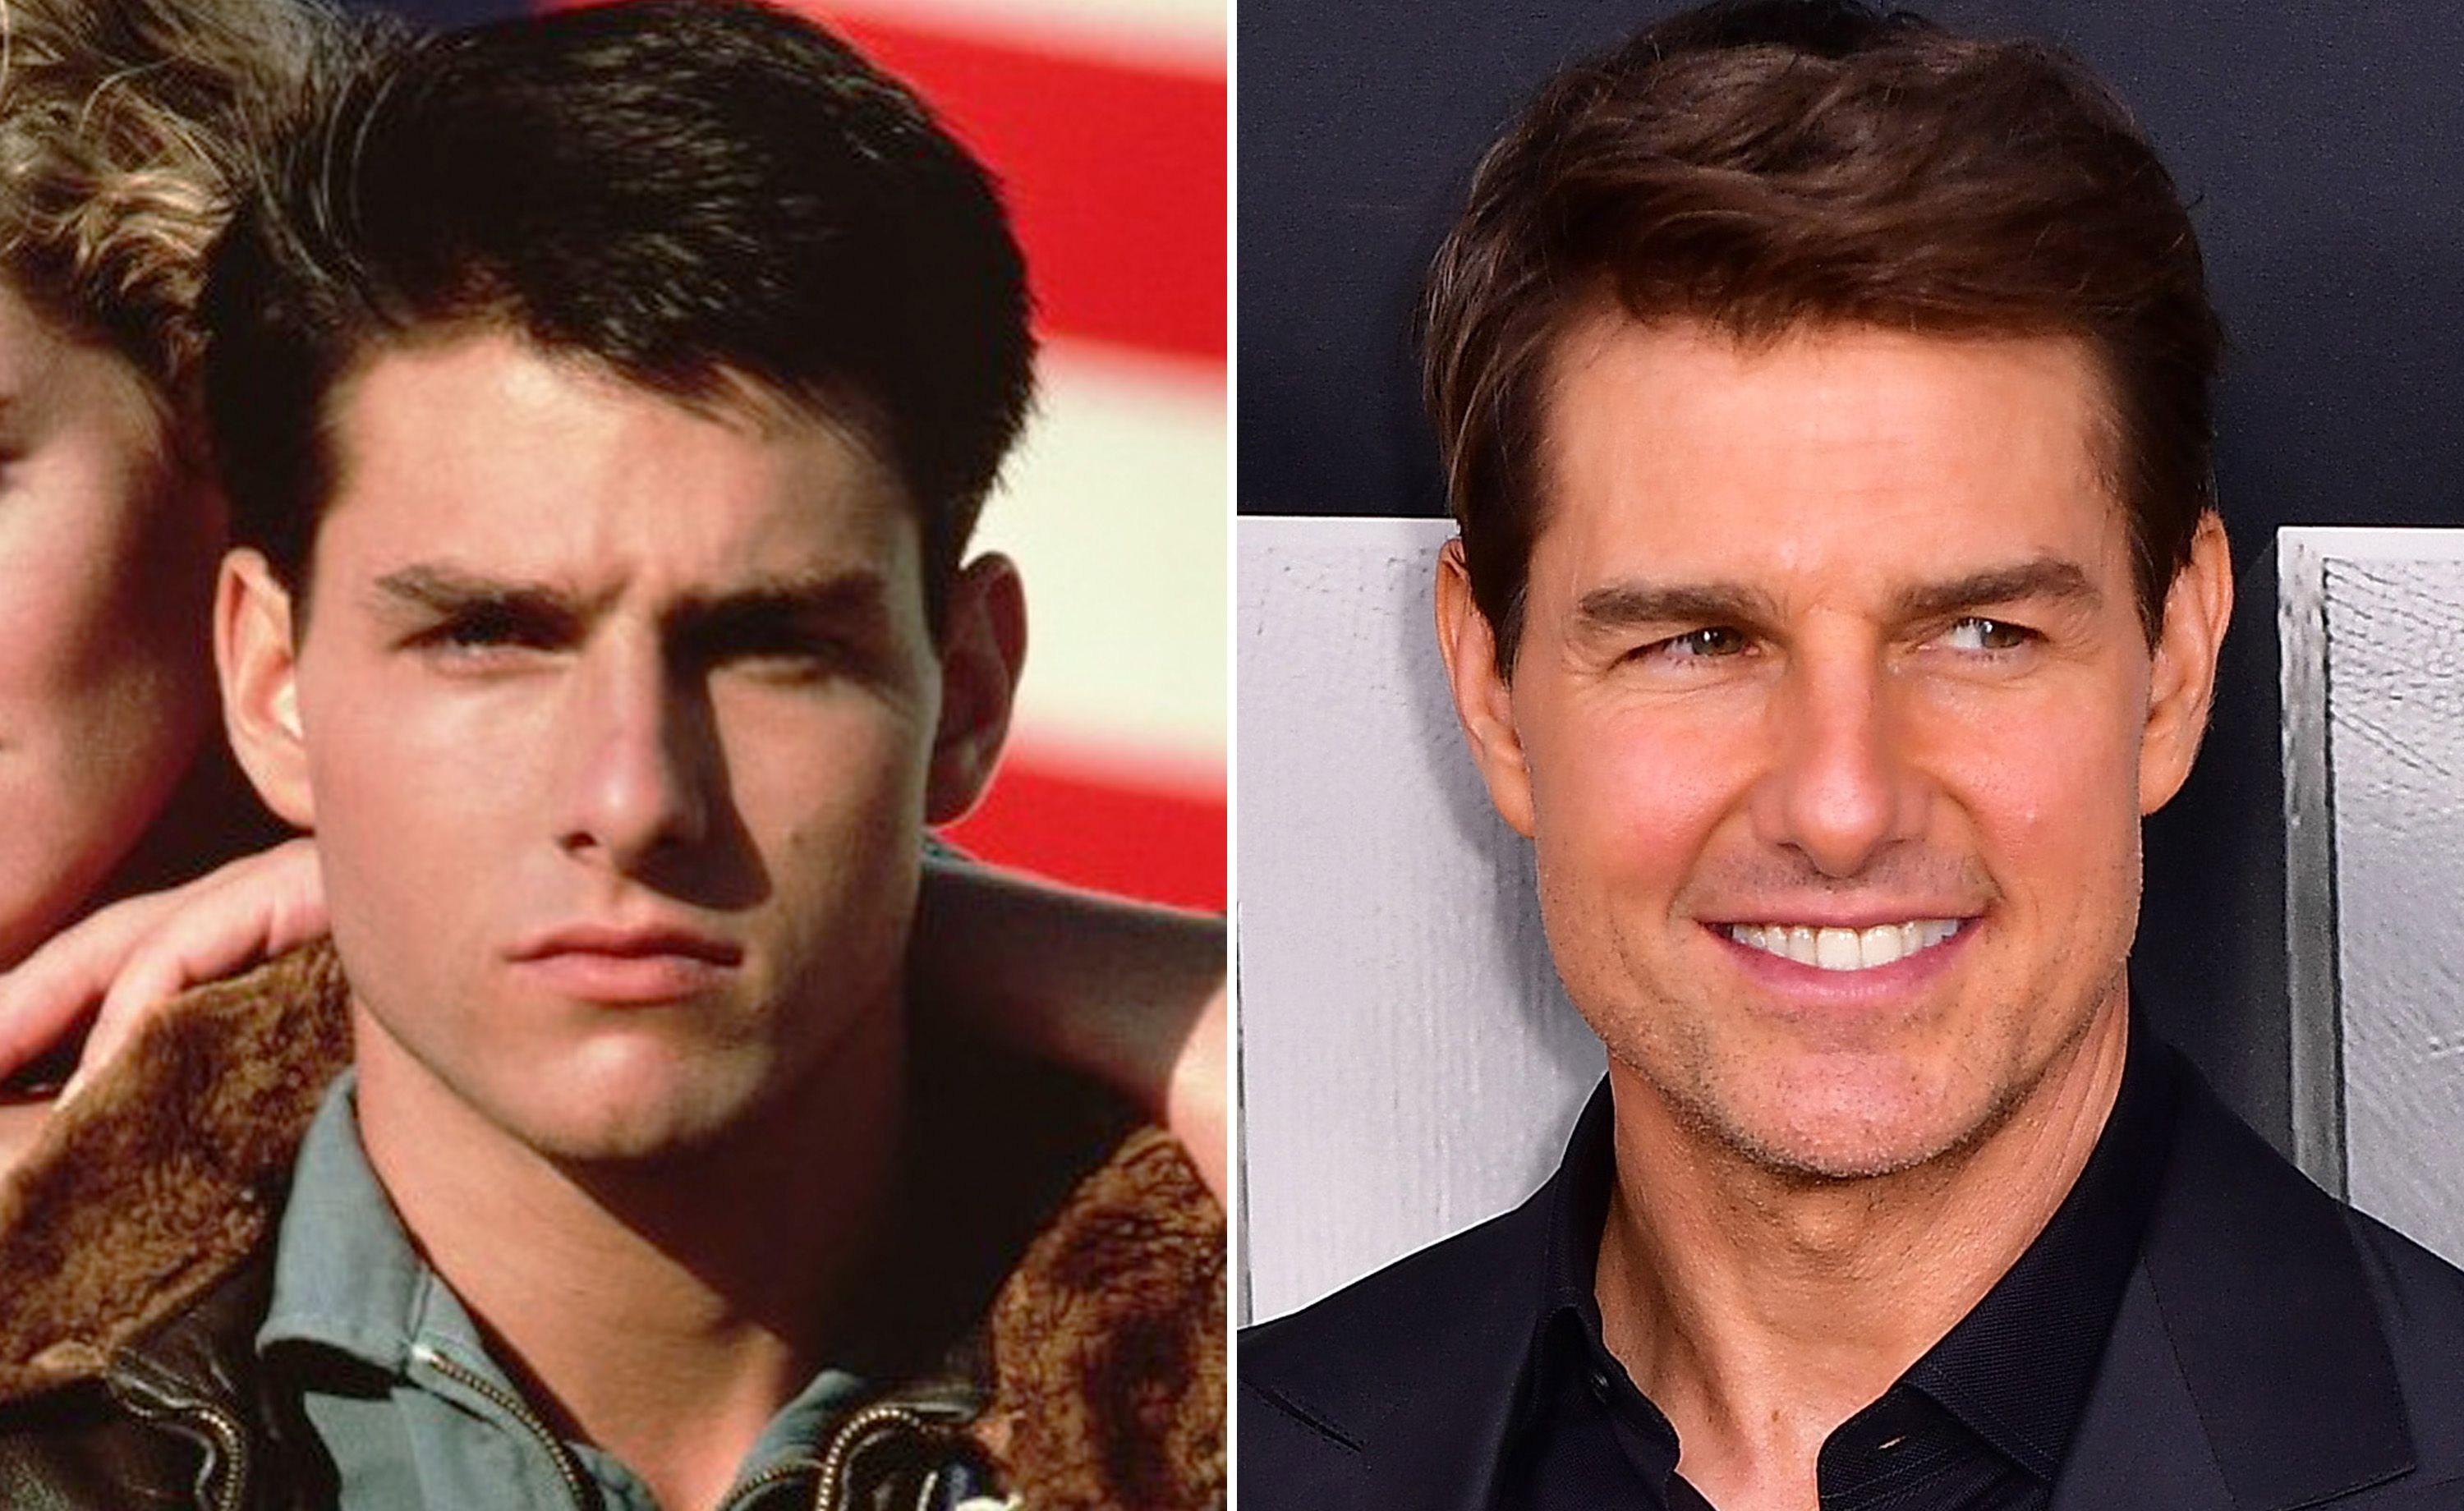 Top Gun' Cast: Where Are They Now? Tom Cruise, Val Kilmer